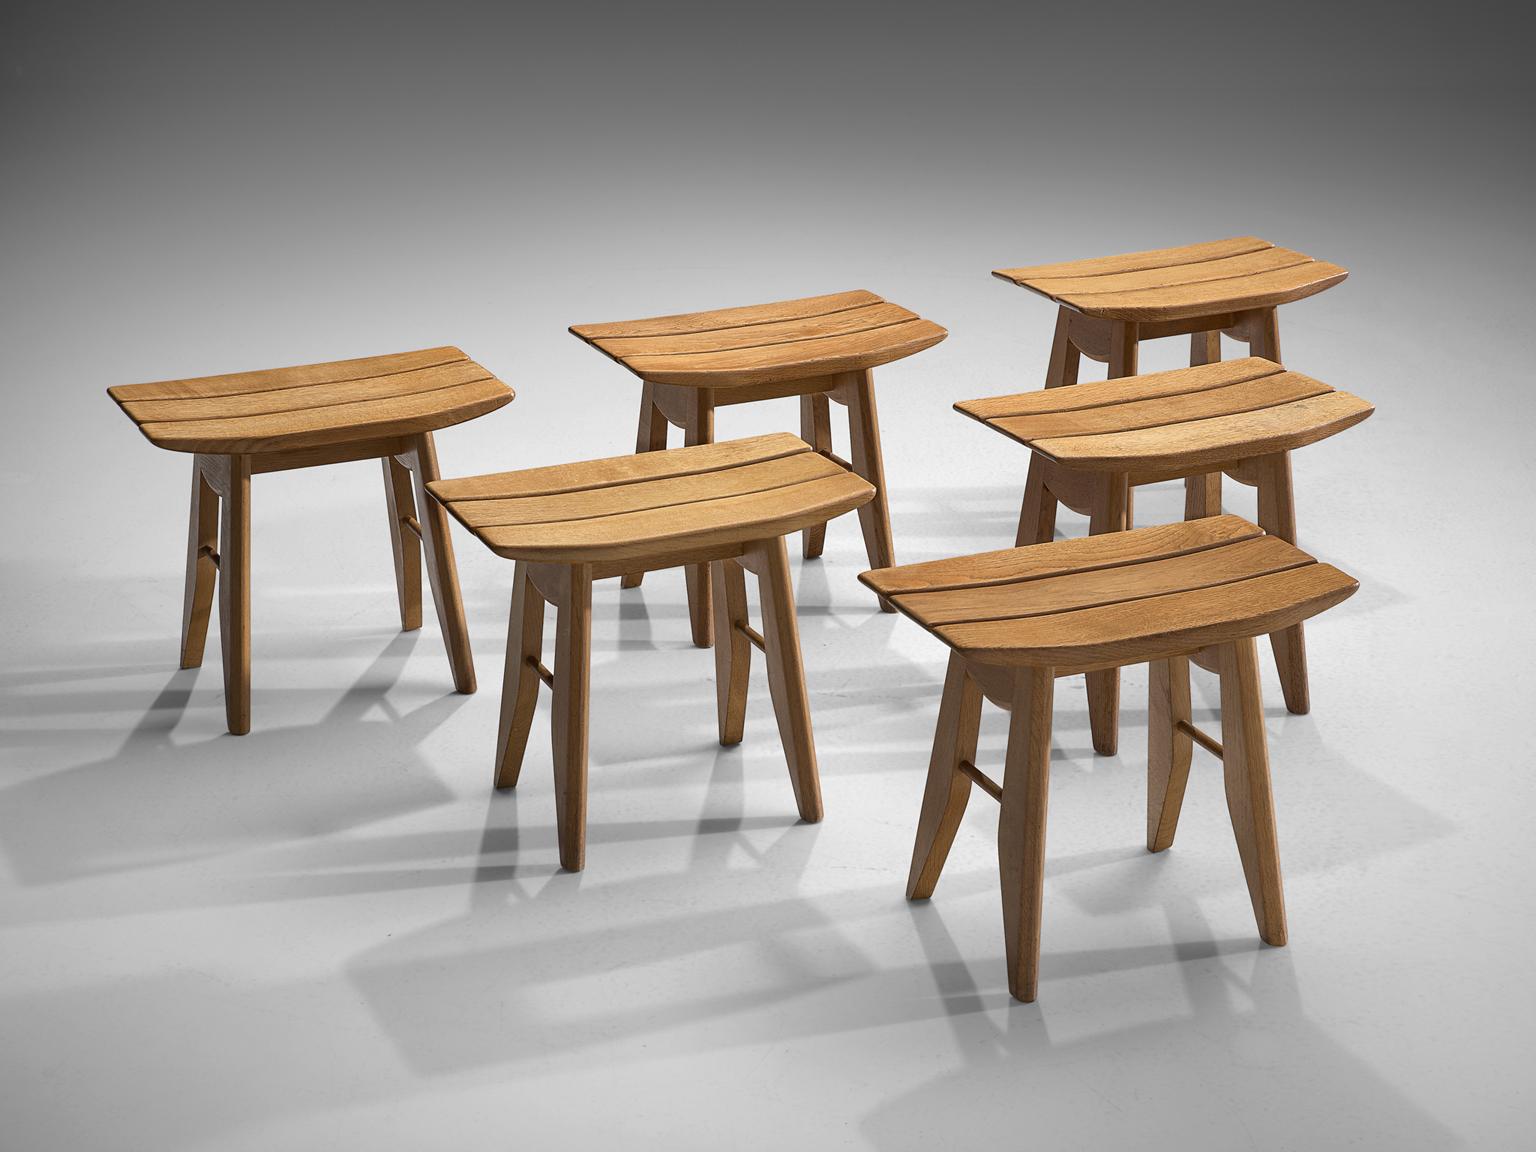 Guillerme et Chambron, set of six stools, solid oak, France, 1960s.

Set of six tabourets in oak by French designer duo Guillerme and Chambron. These stools have a sculptural, Japanese appearance. The top is made of three slats, the two on the